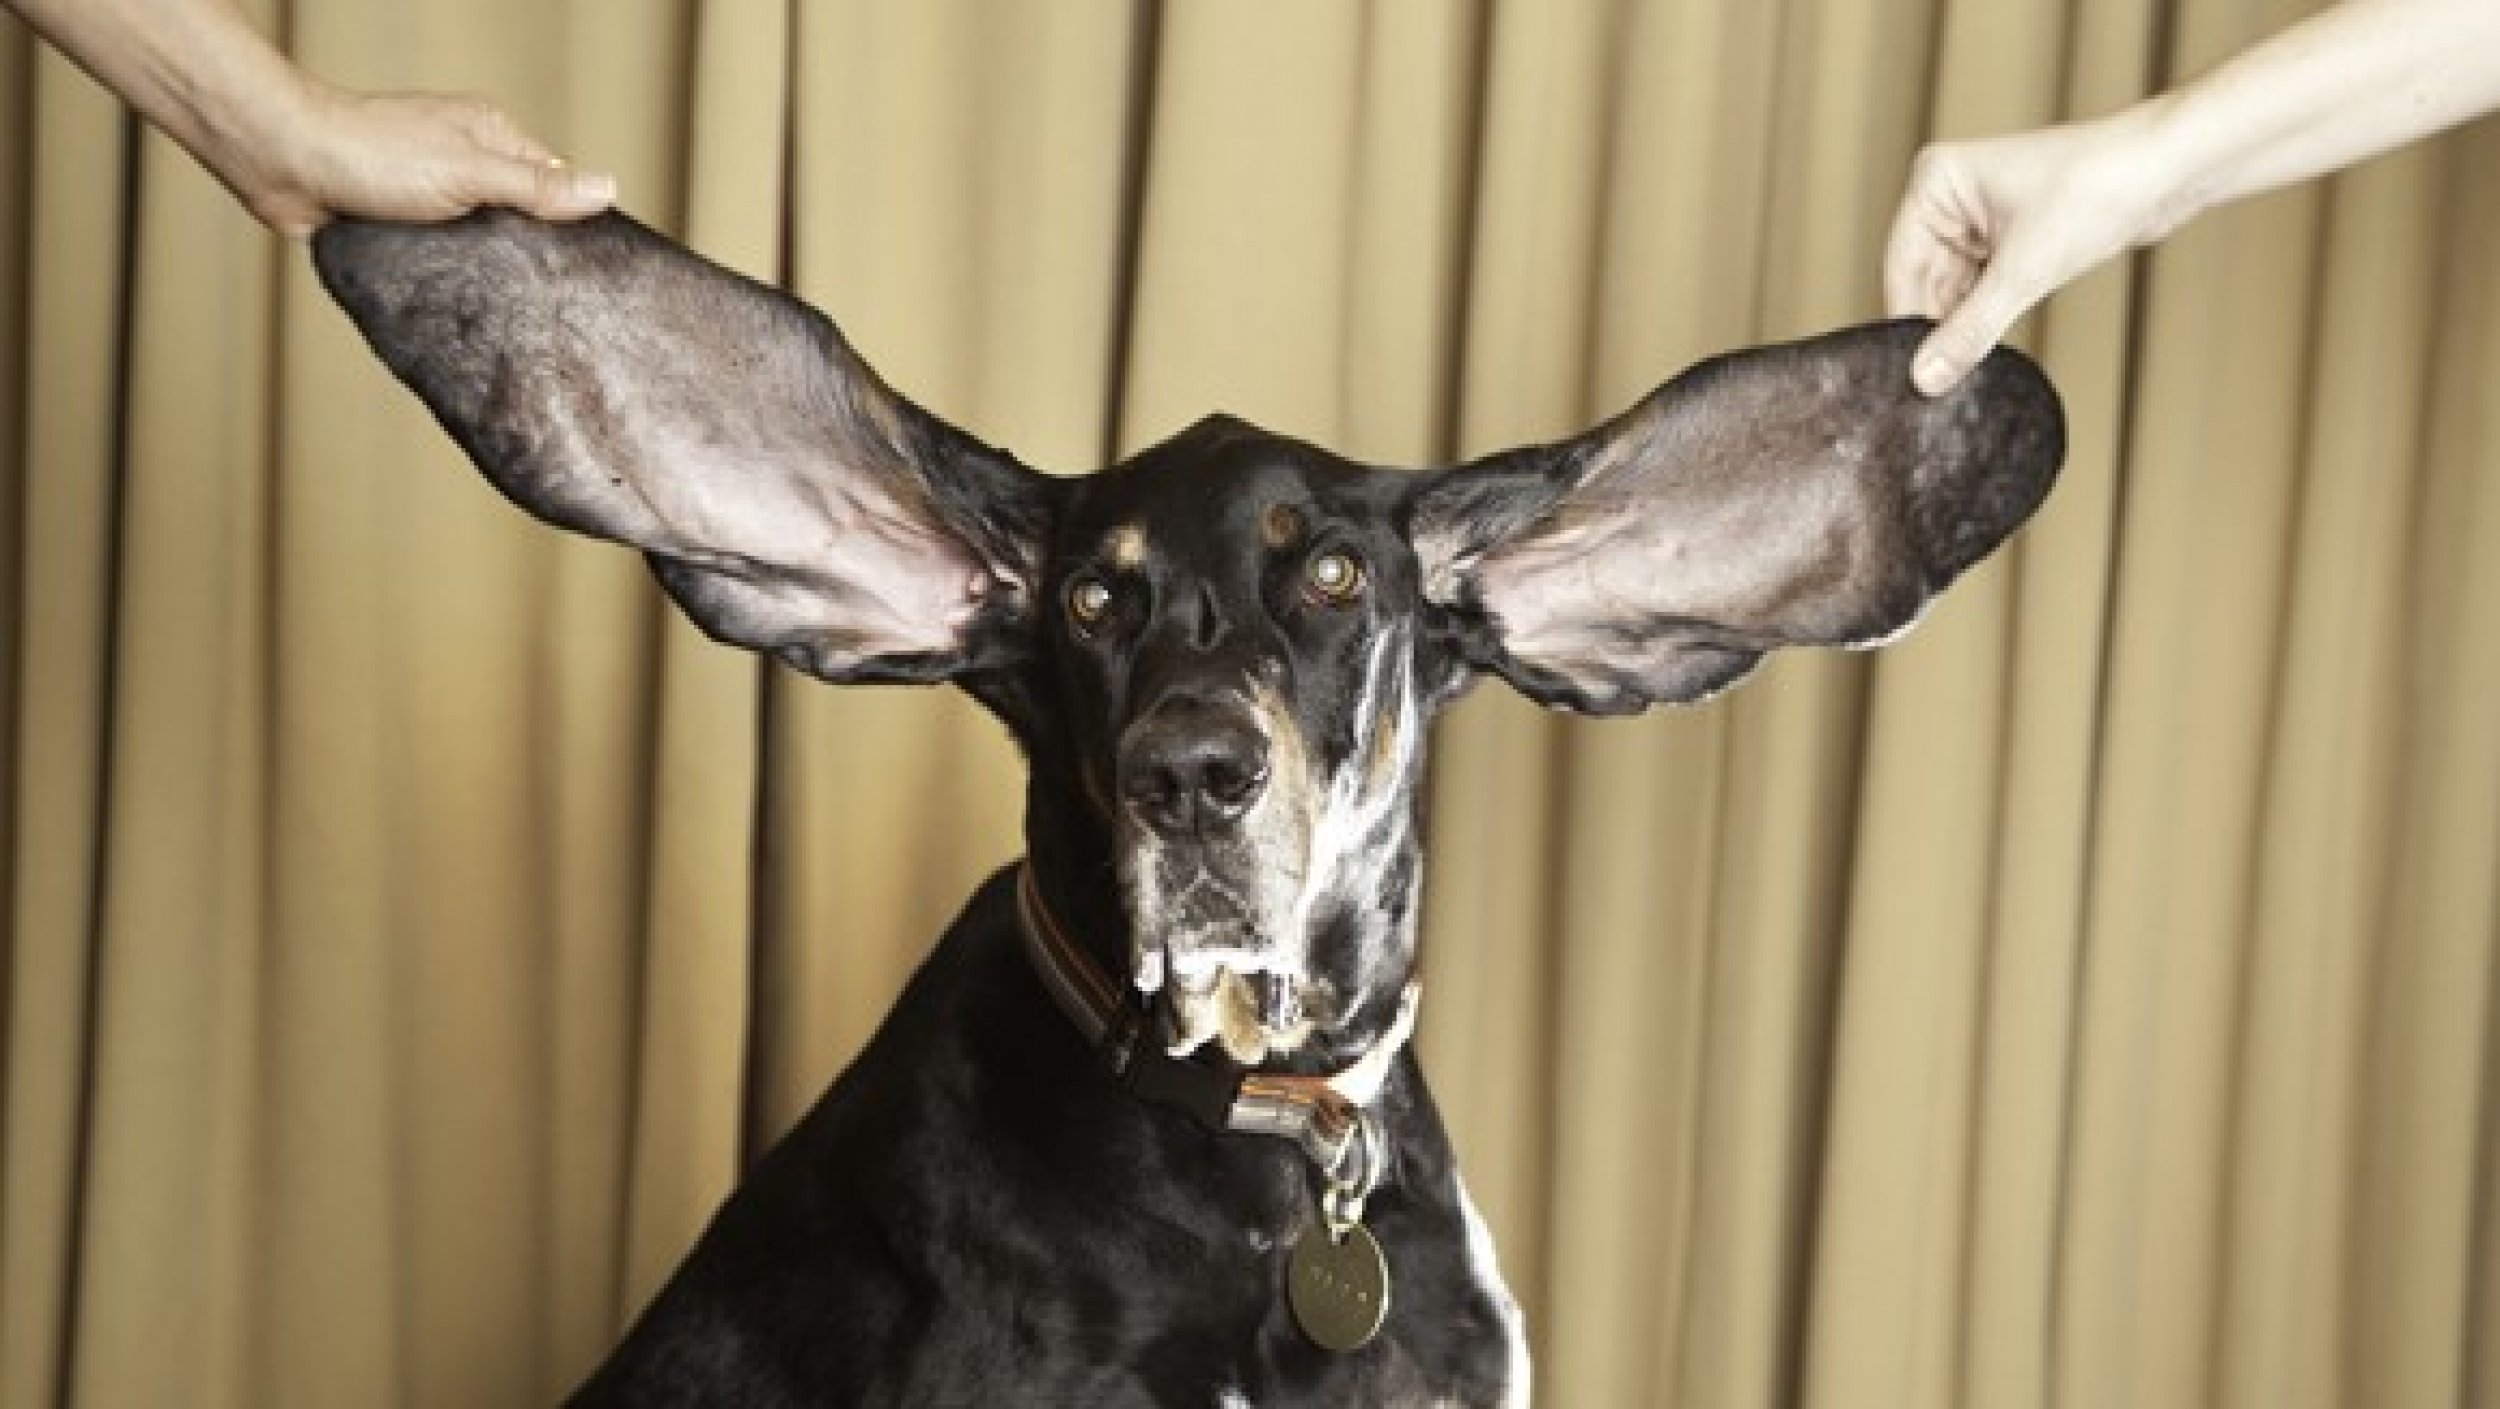 Harbour, the dog with longest ears